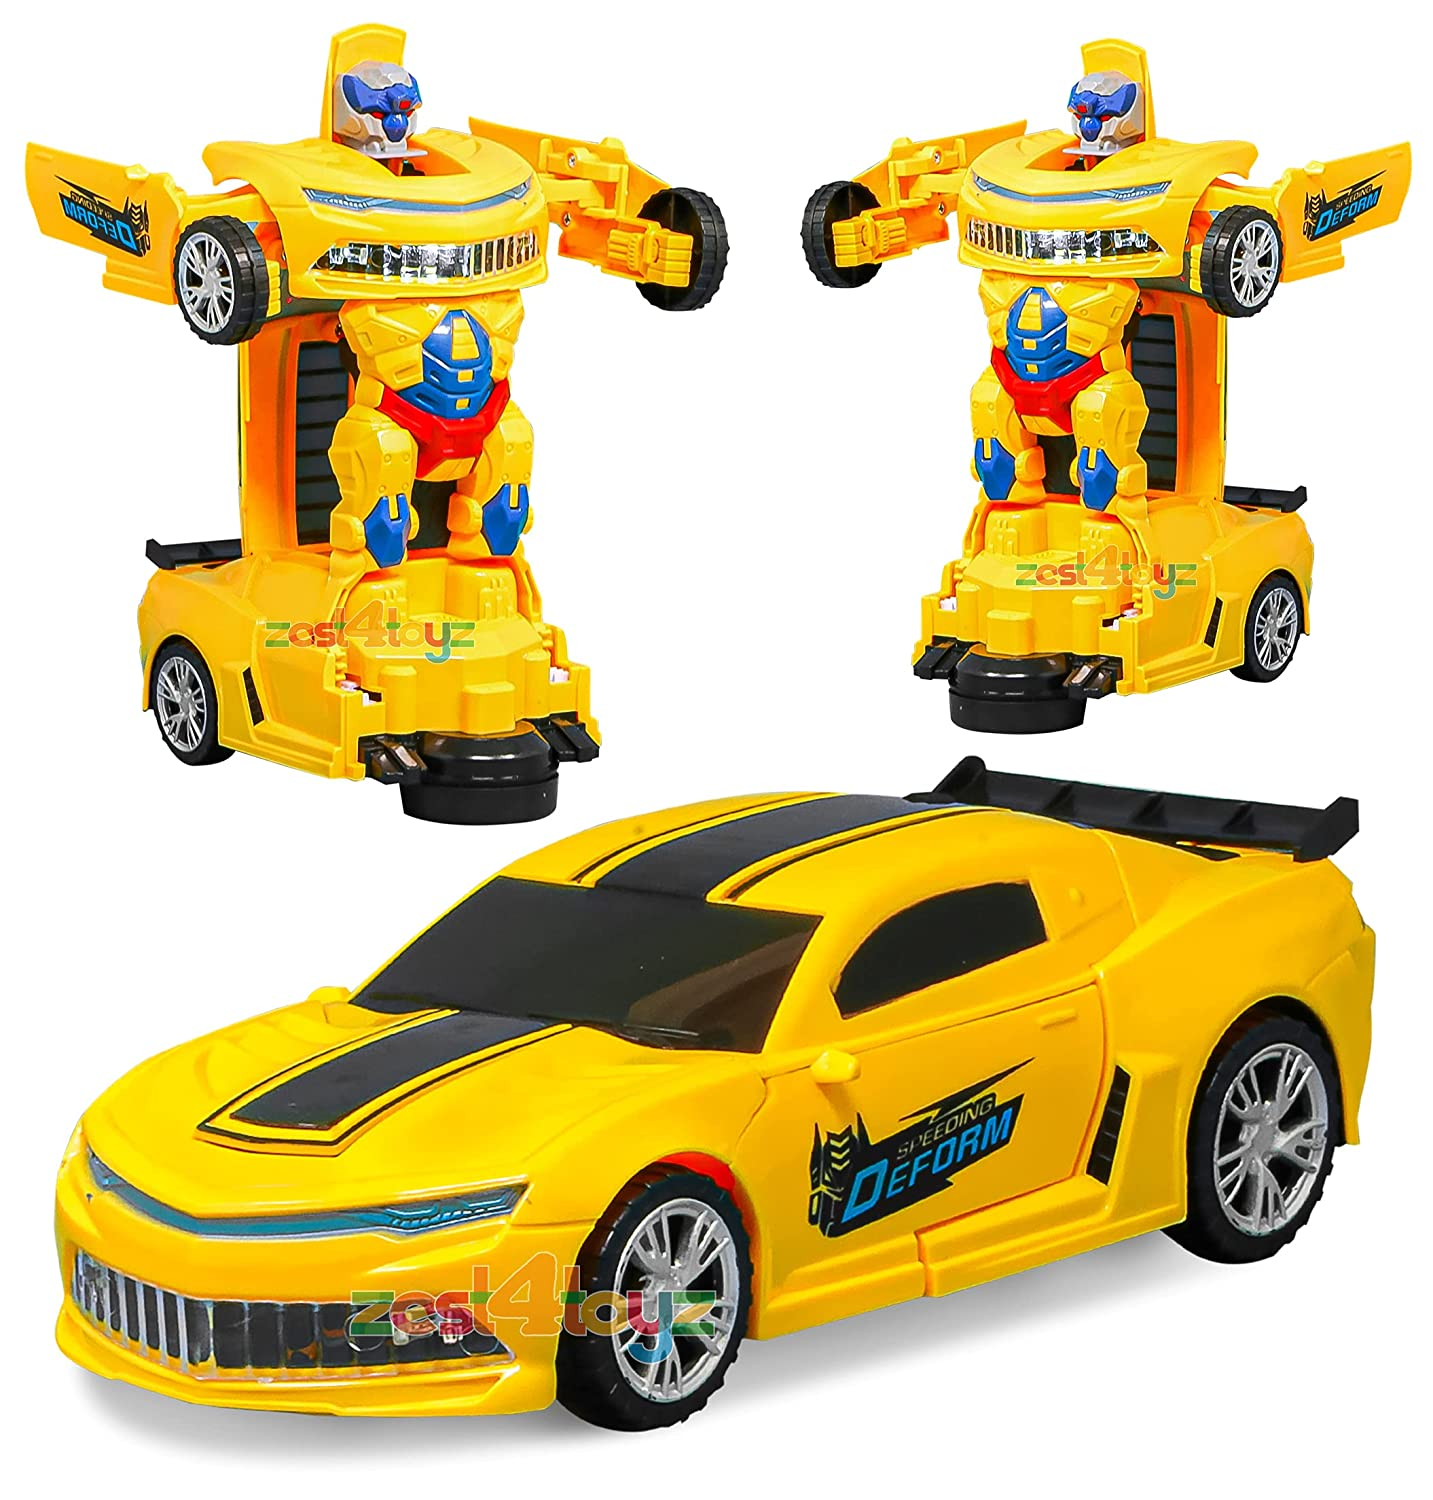 Transforming Robot Car, One Button Deformation Car Robot Toy with Realistic Race Car Sounds, LED Lights and 360 Degree Rotating Robot Function,Deform car - eFamas